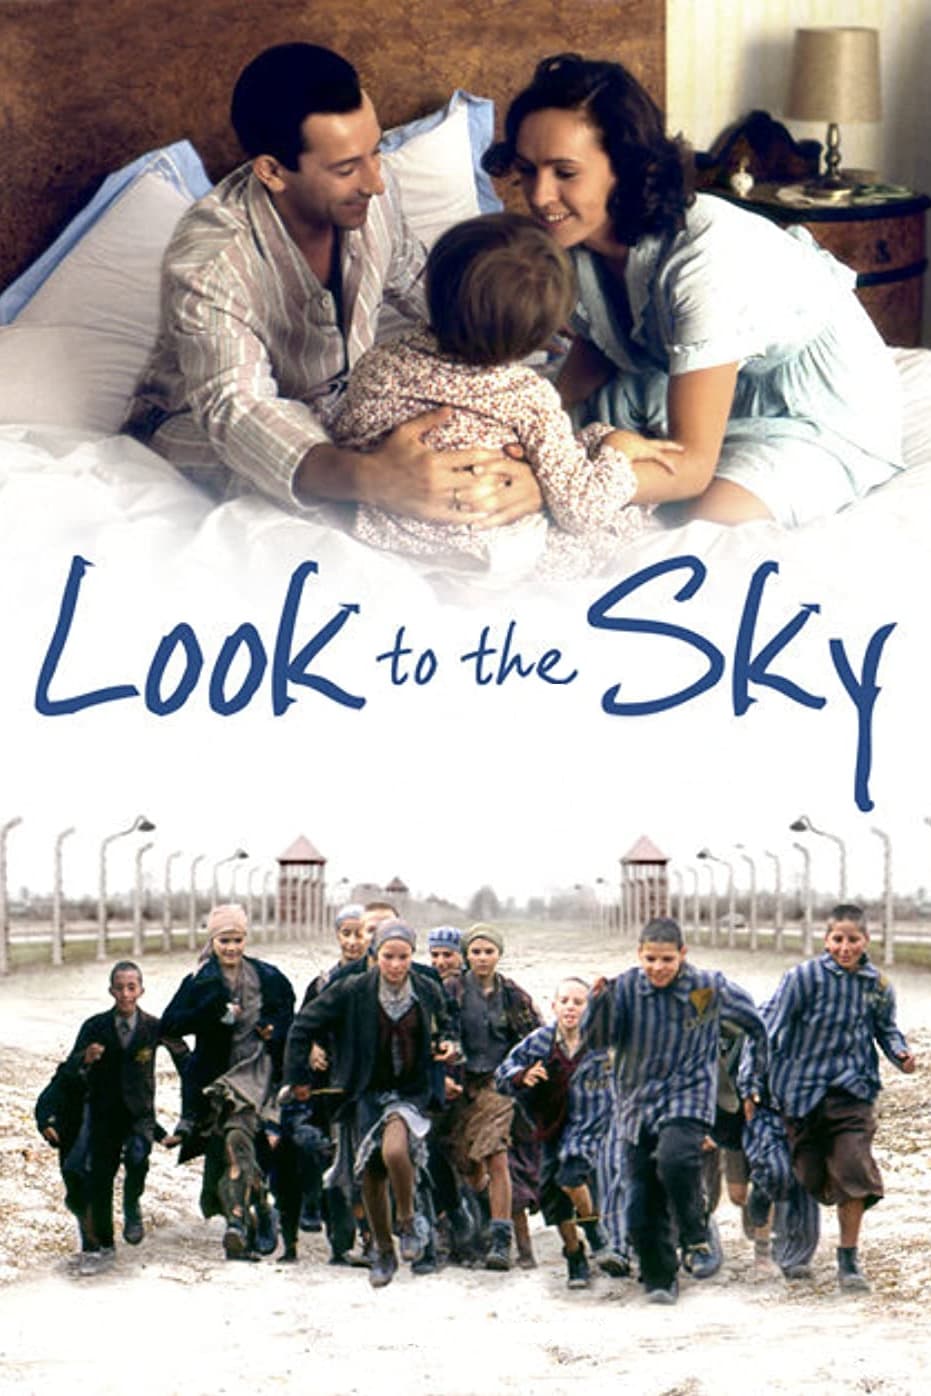 Look to the Sky (1993)